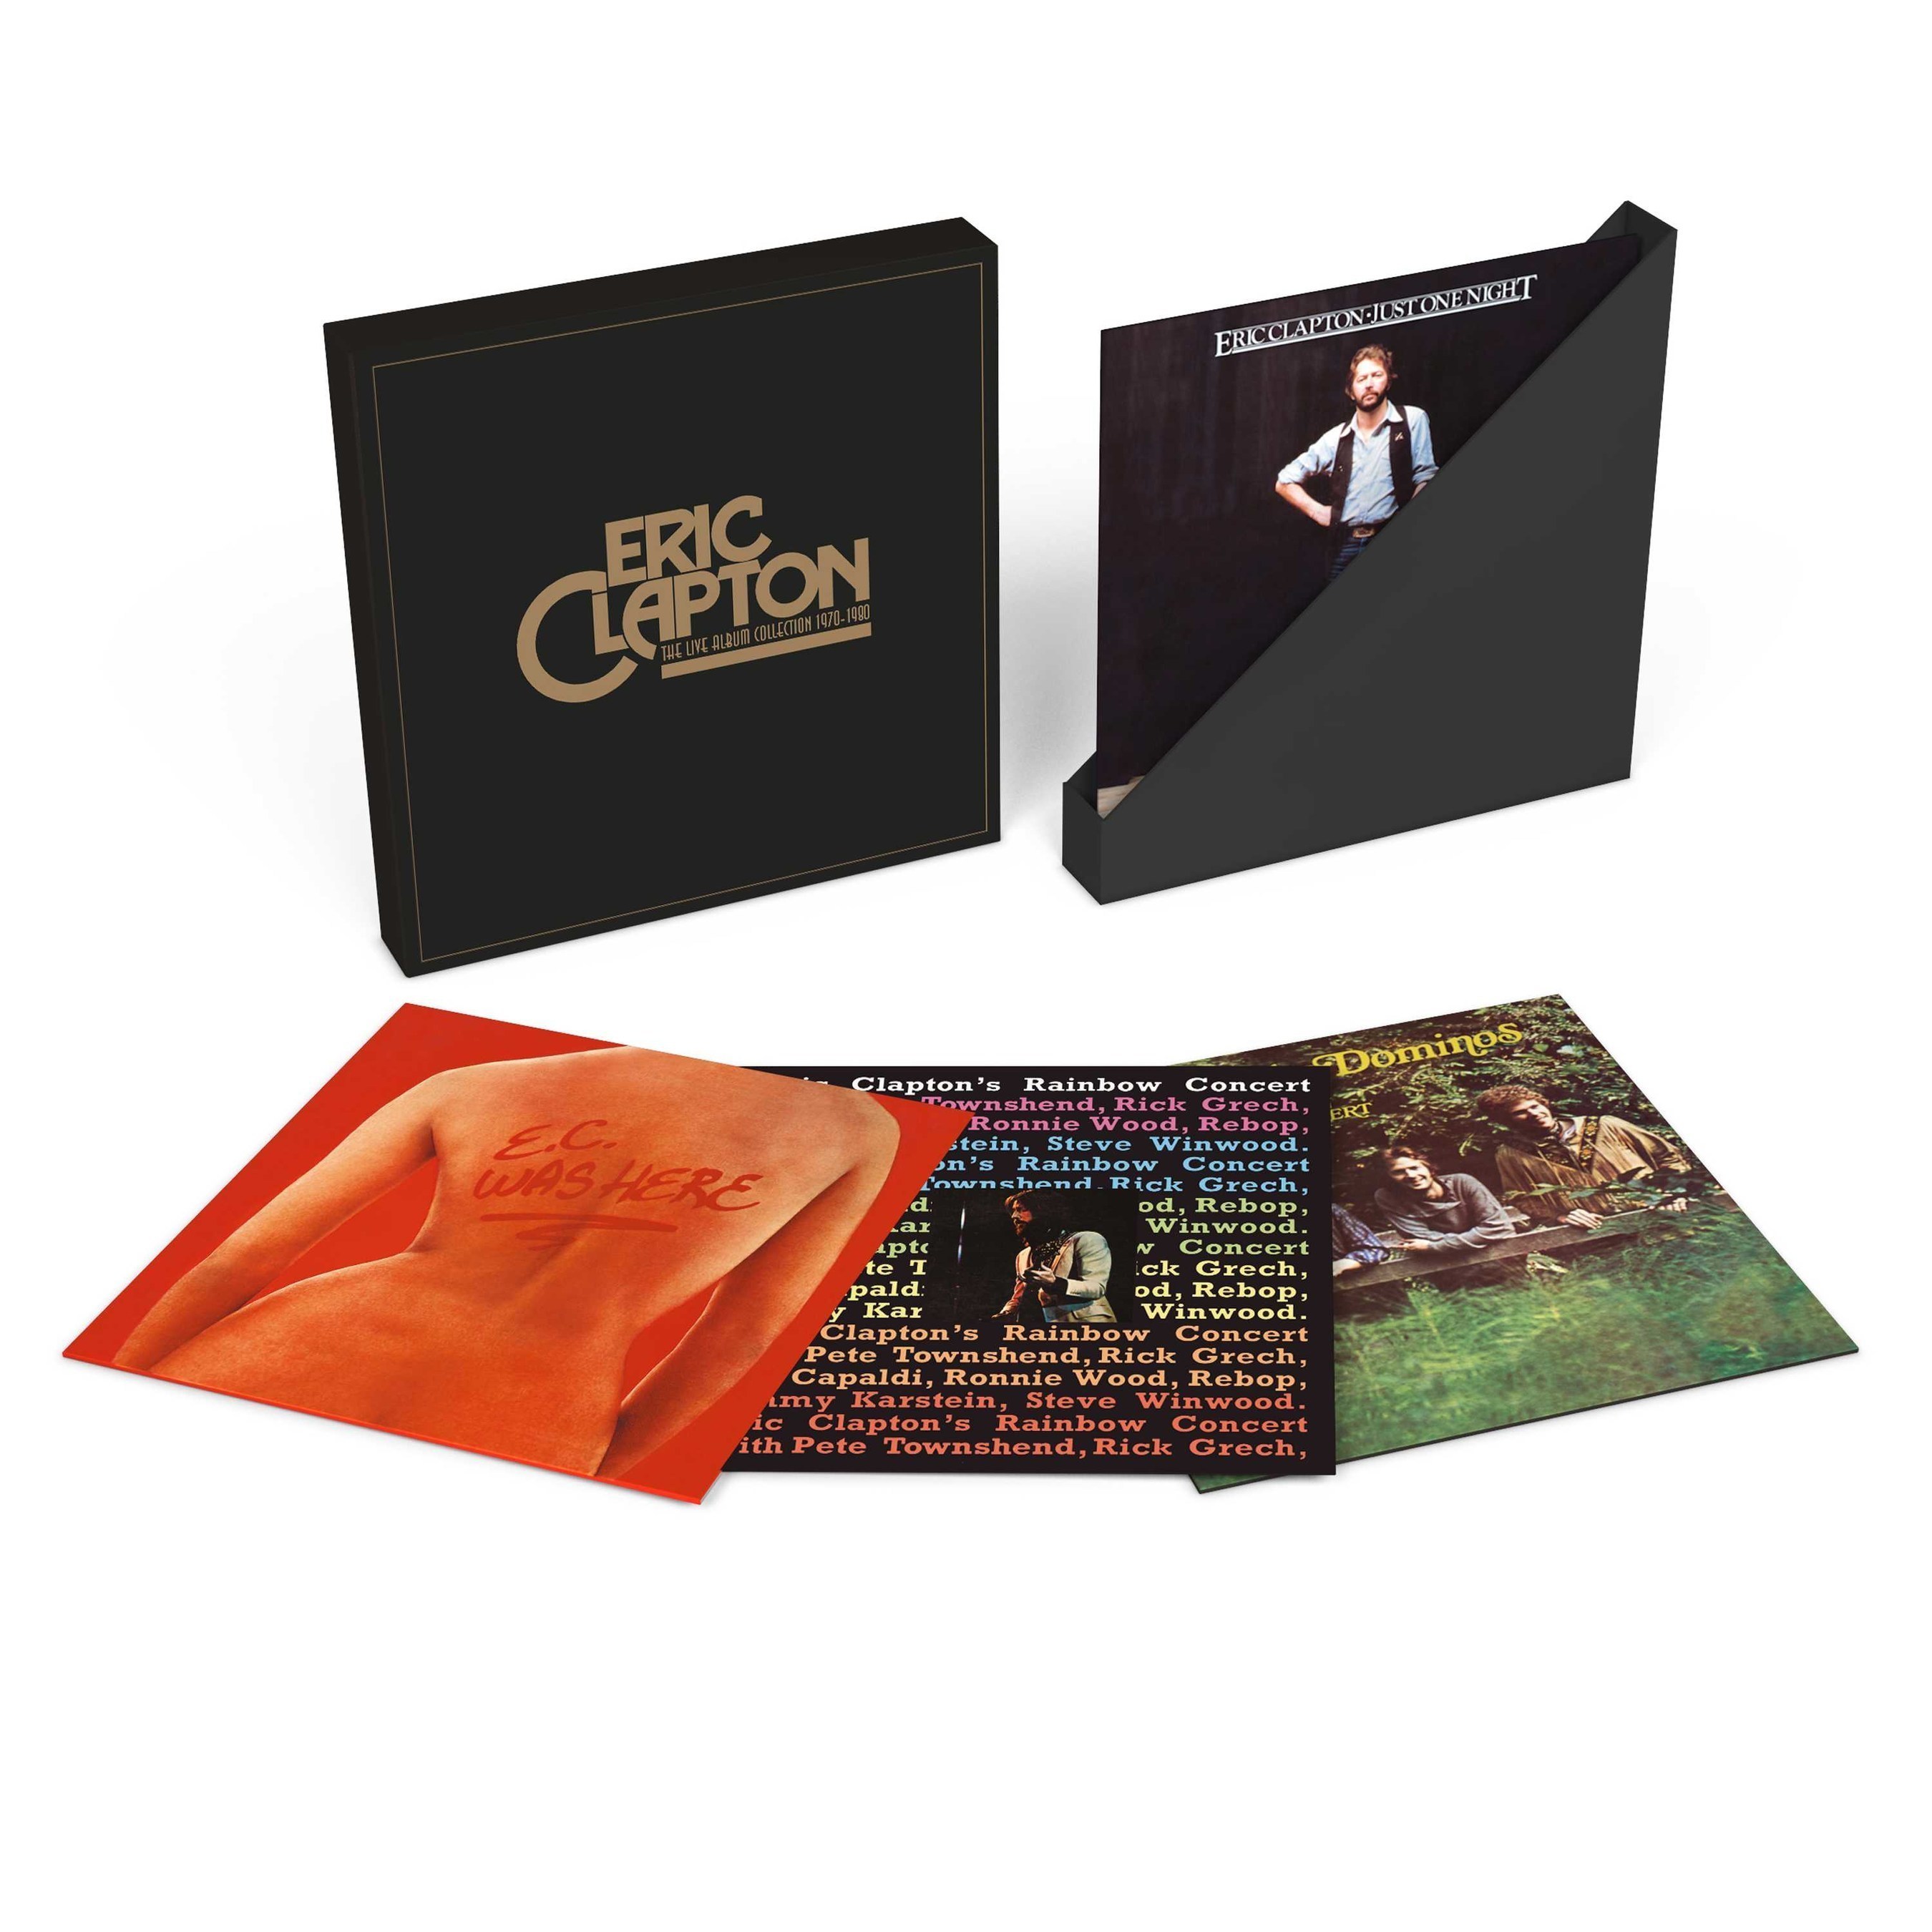 ERIC CLAPTONTHE LIVE ALBUM COLLECTION 1970-19804 ALBUM, 6 PIECE VINYL-ONLY BOX SET AVAILABLE MARCH 25th, 2016This spring sees the release of all of Eric Clapton's live albums from his recording period with Polydor/RSO,1970-1980.  Each album here has been newly remastered and pressed on heavyweight vinyl. Capturing live concerts in New York, California, Rhode Island, Tokyo and London, the collection includes Eric Clapton's 1973 concert at London's Rainbow with an all-star line-up.